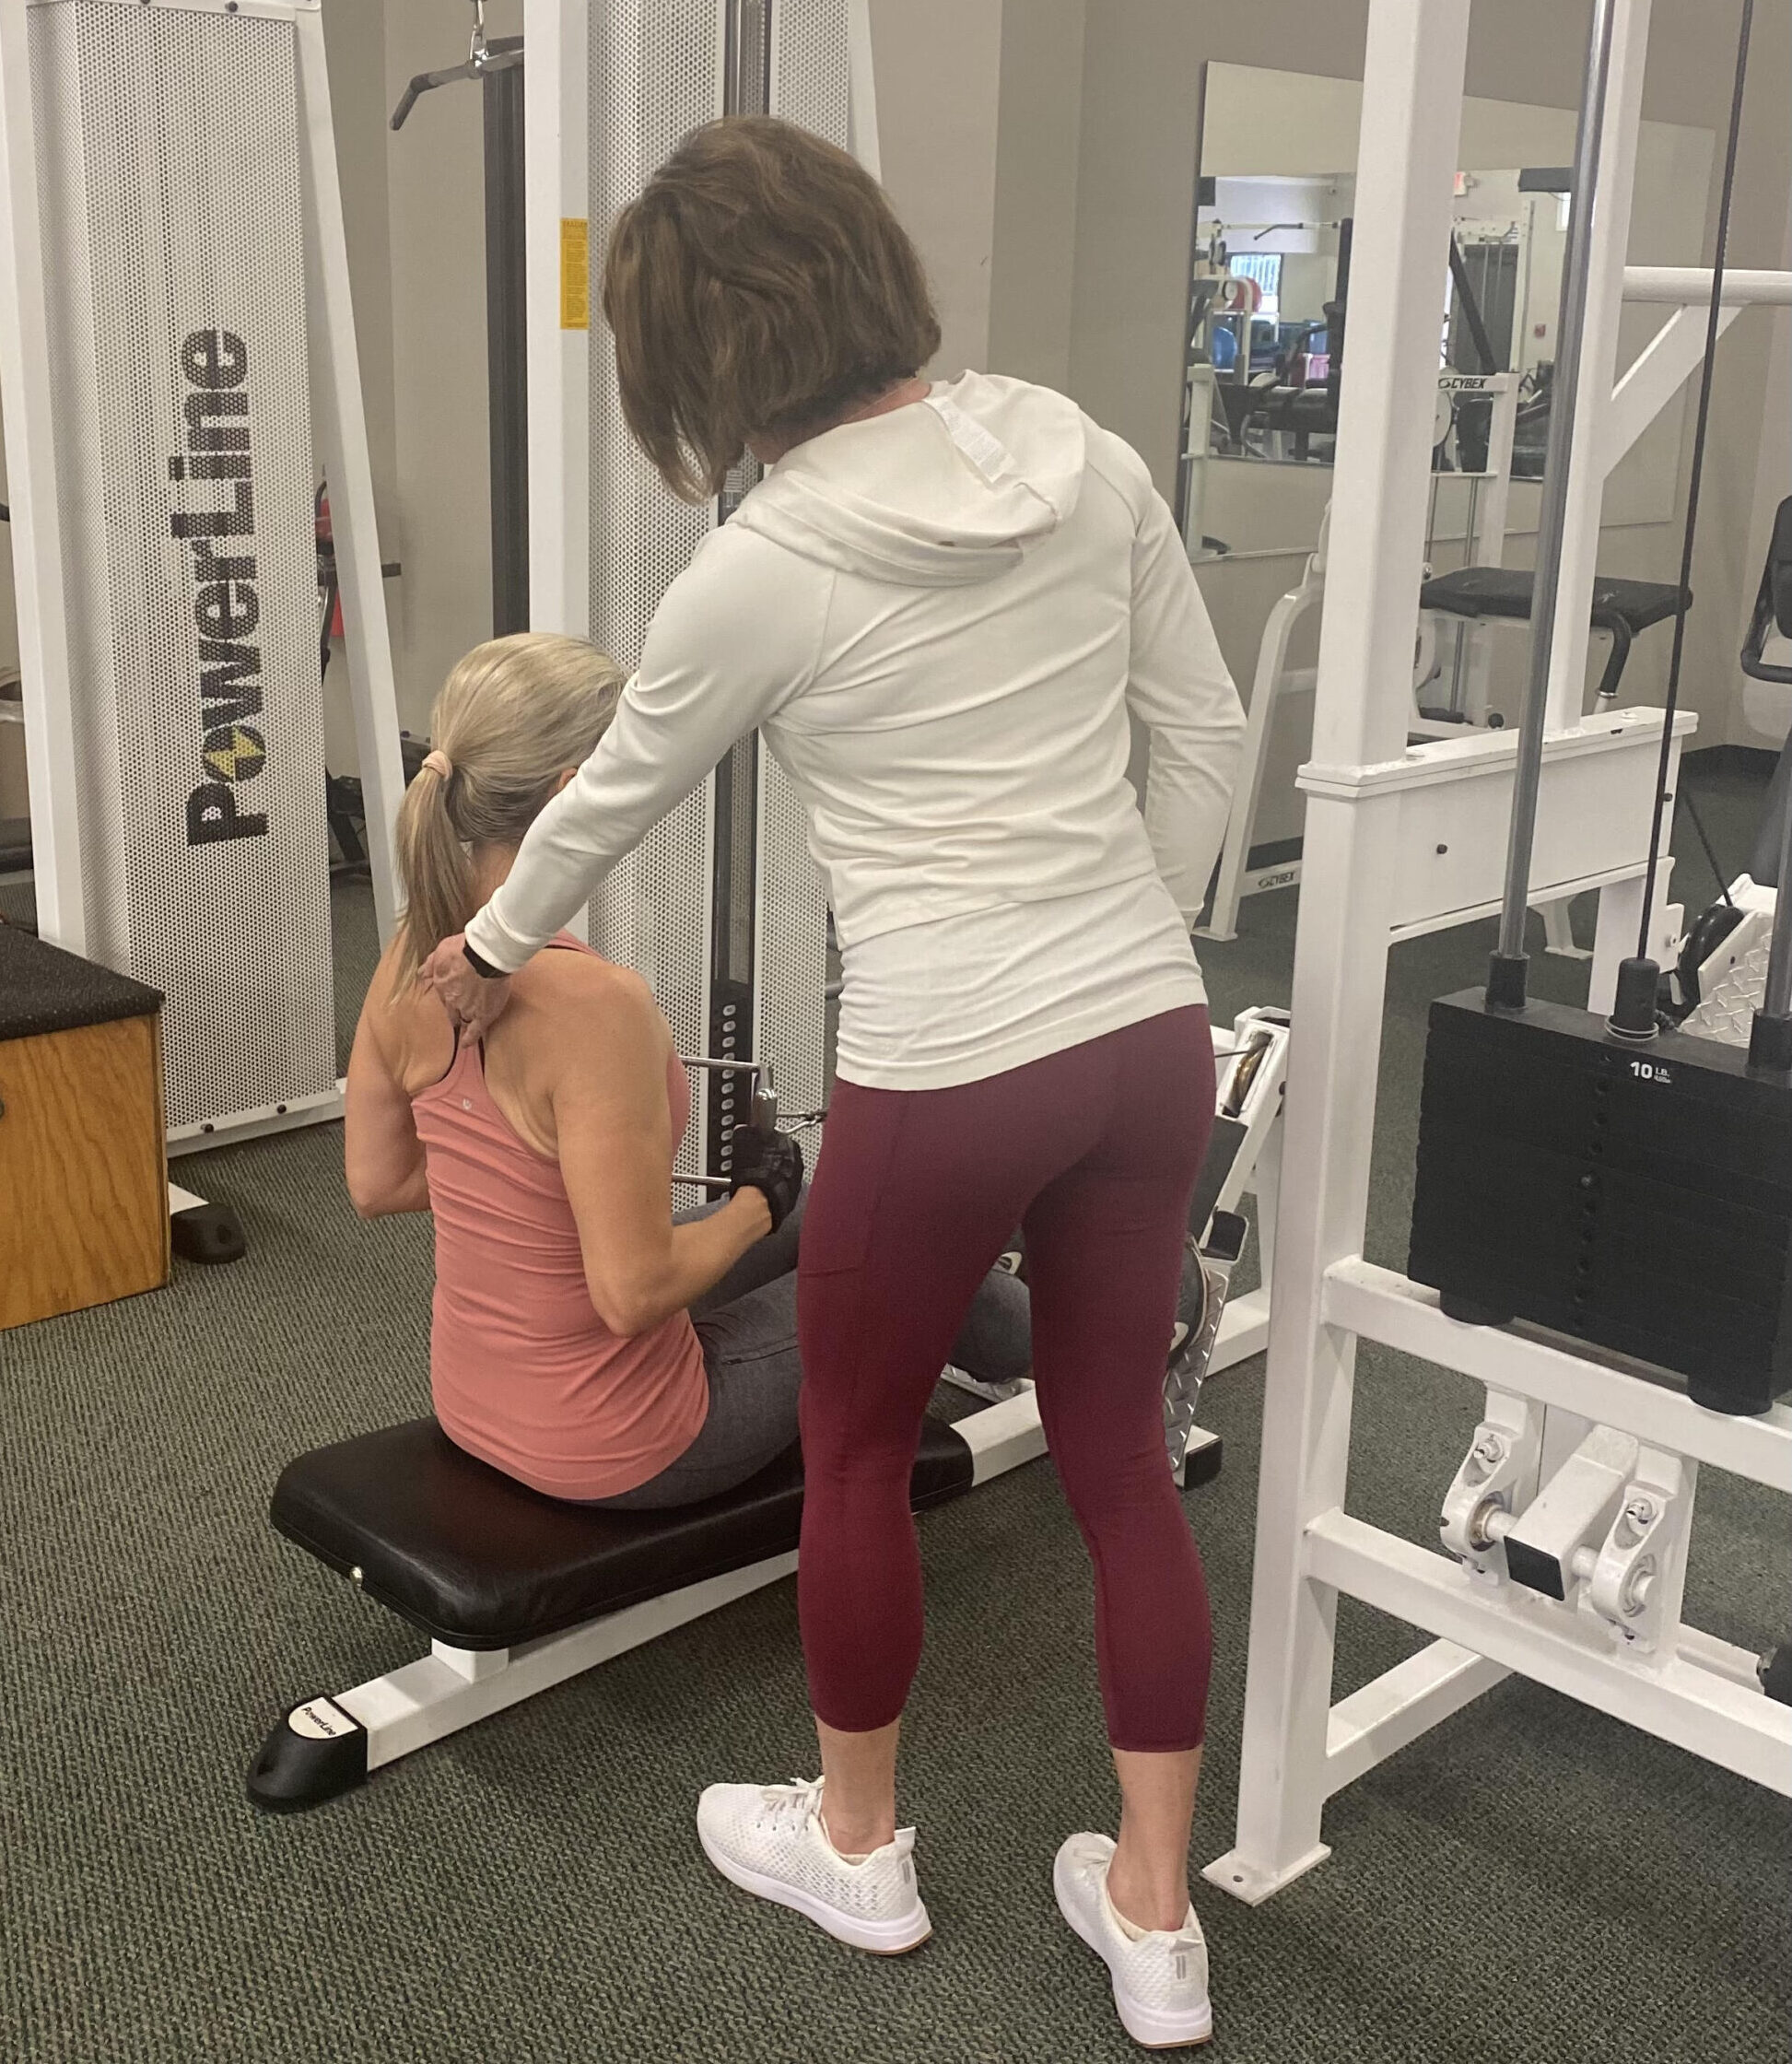 helping a client with weight machine